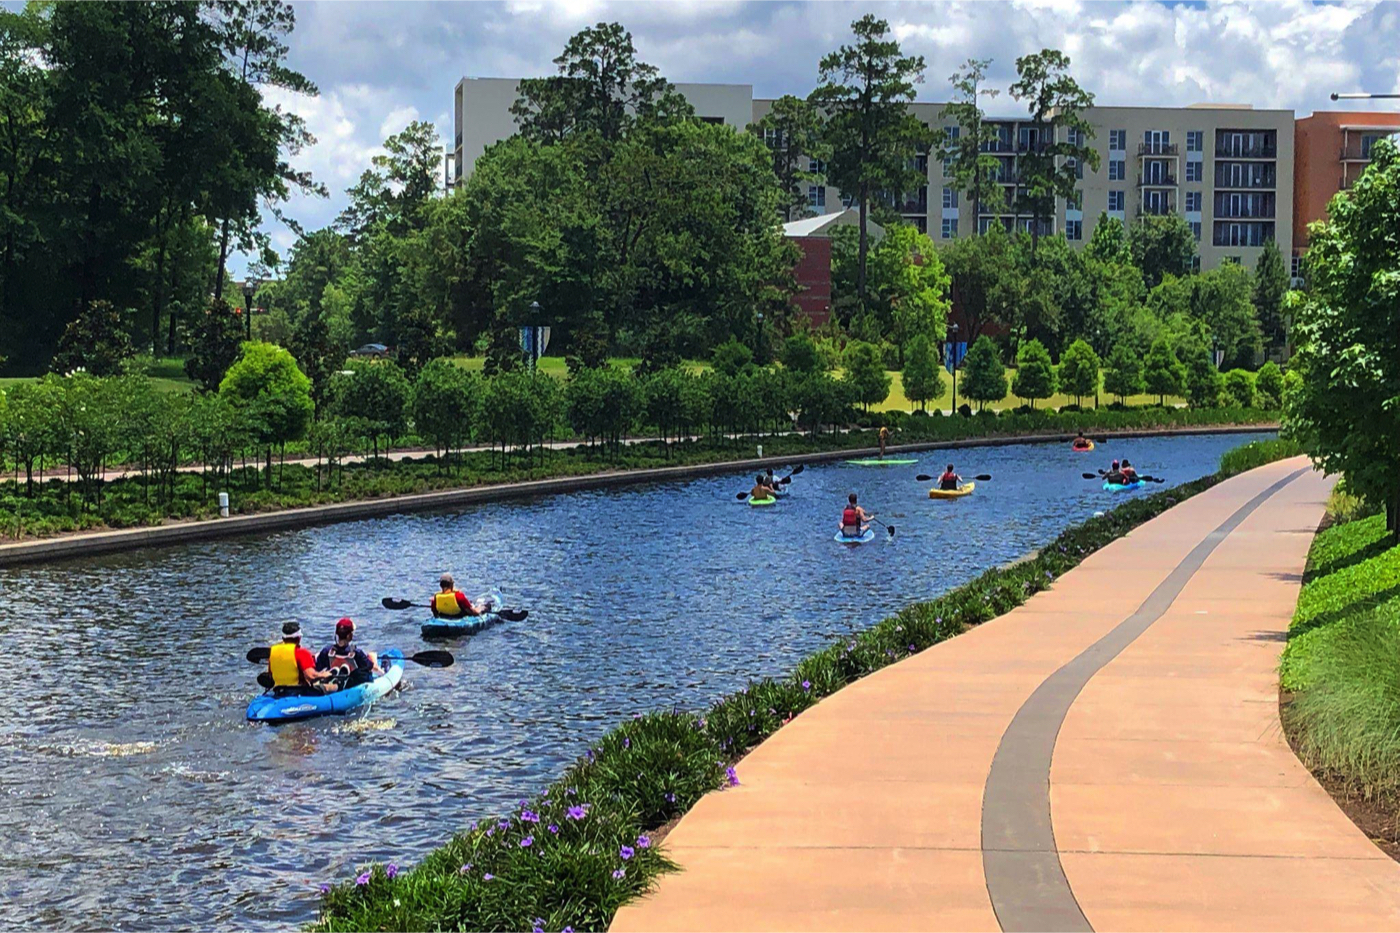 11 AWESOME THINGS TO DO IN THE WOODLANDS, TEXAS